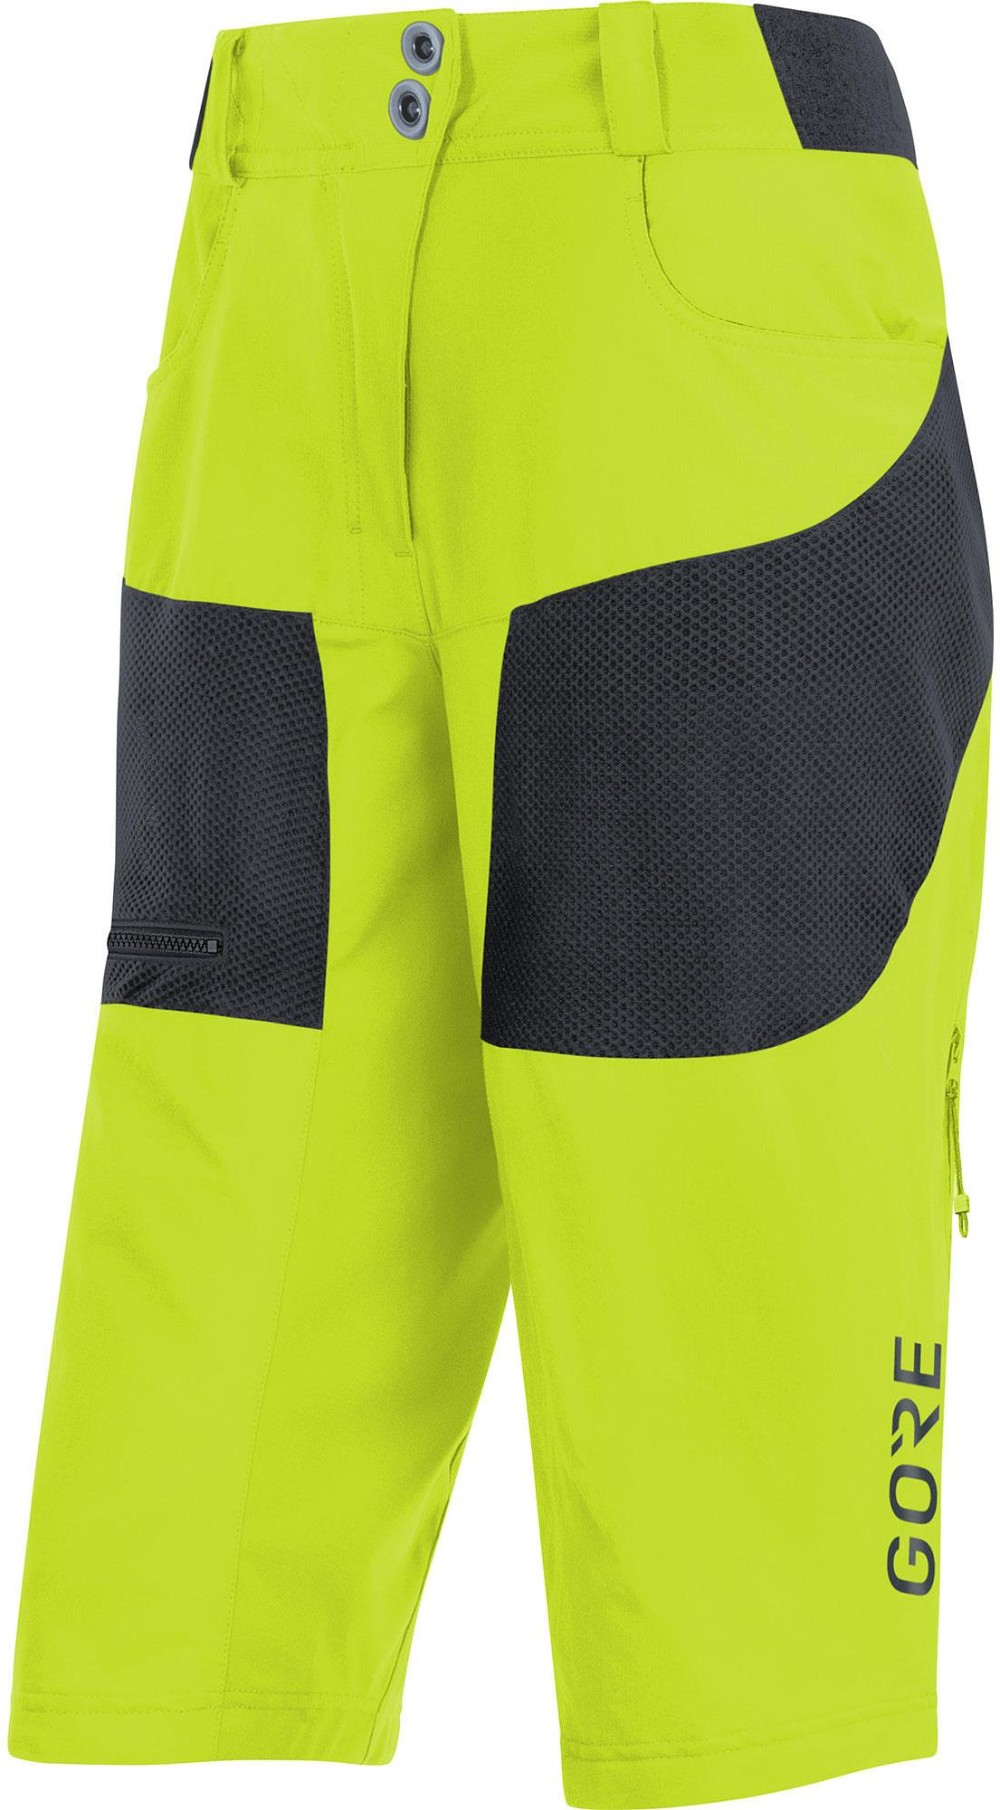 C5 Womens All Mountain Shorts image 0